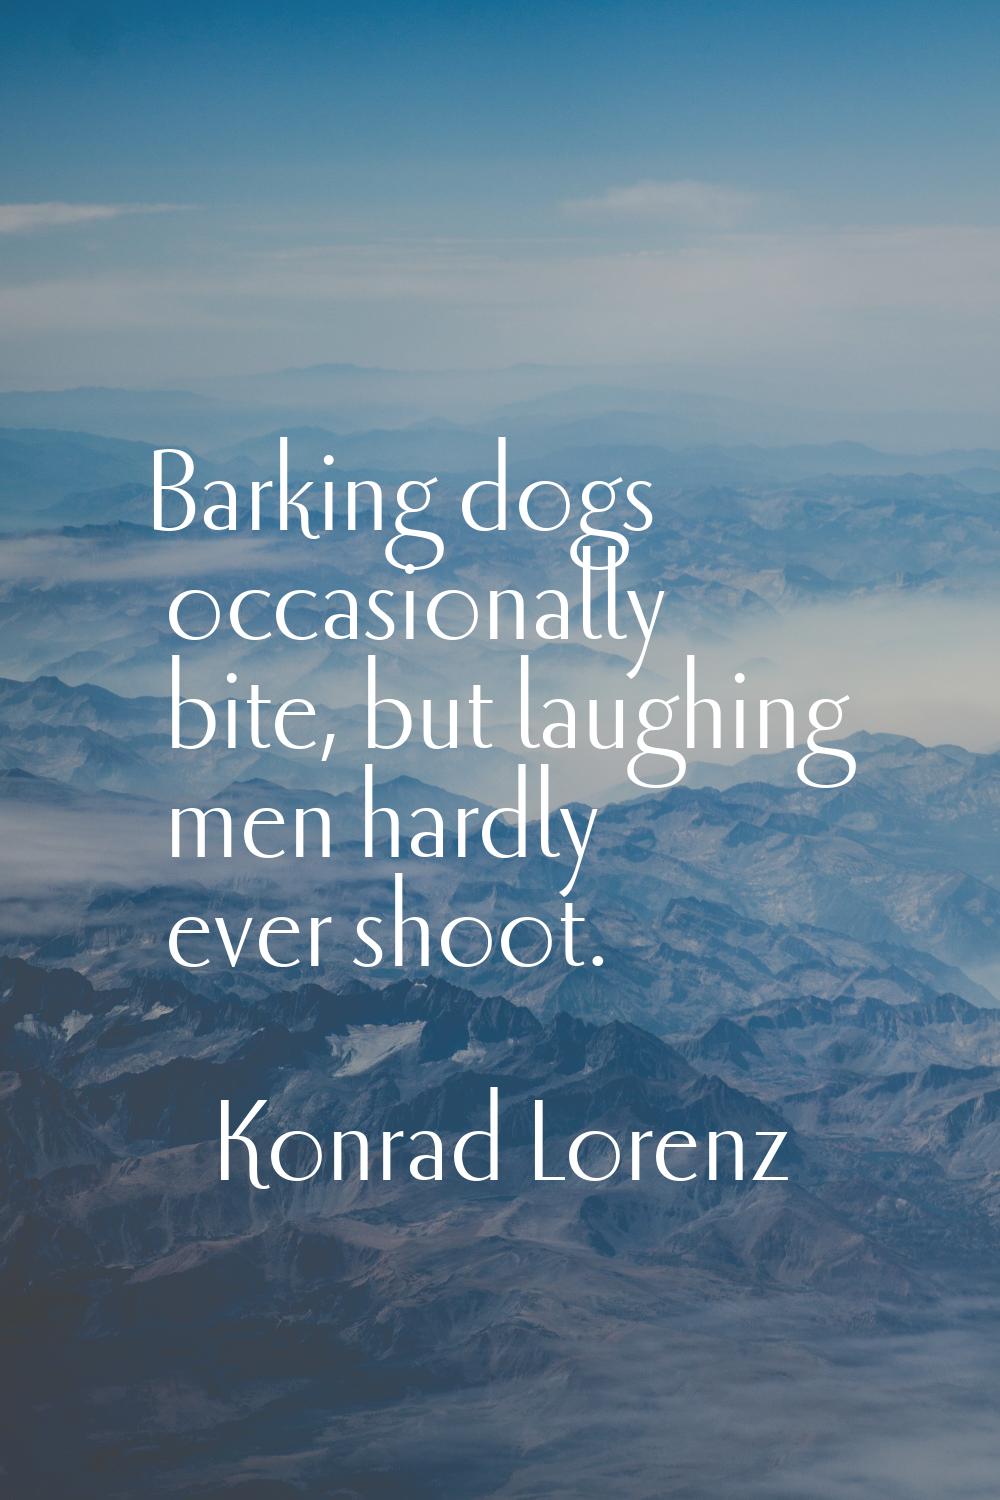 Barking dogs occasionally bite, but laughing men hardly ever shoot.